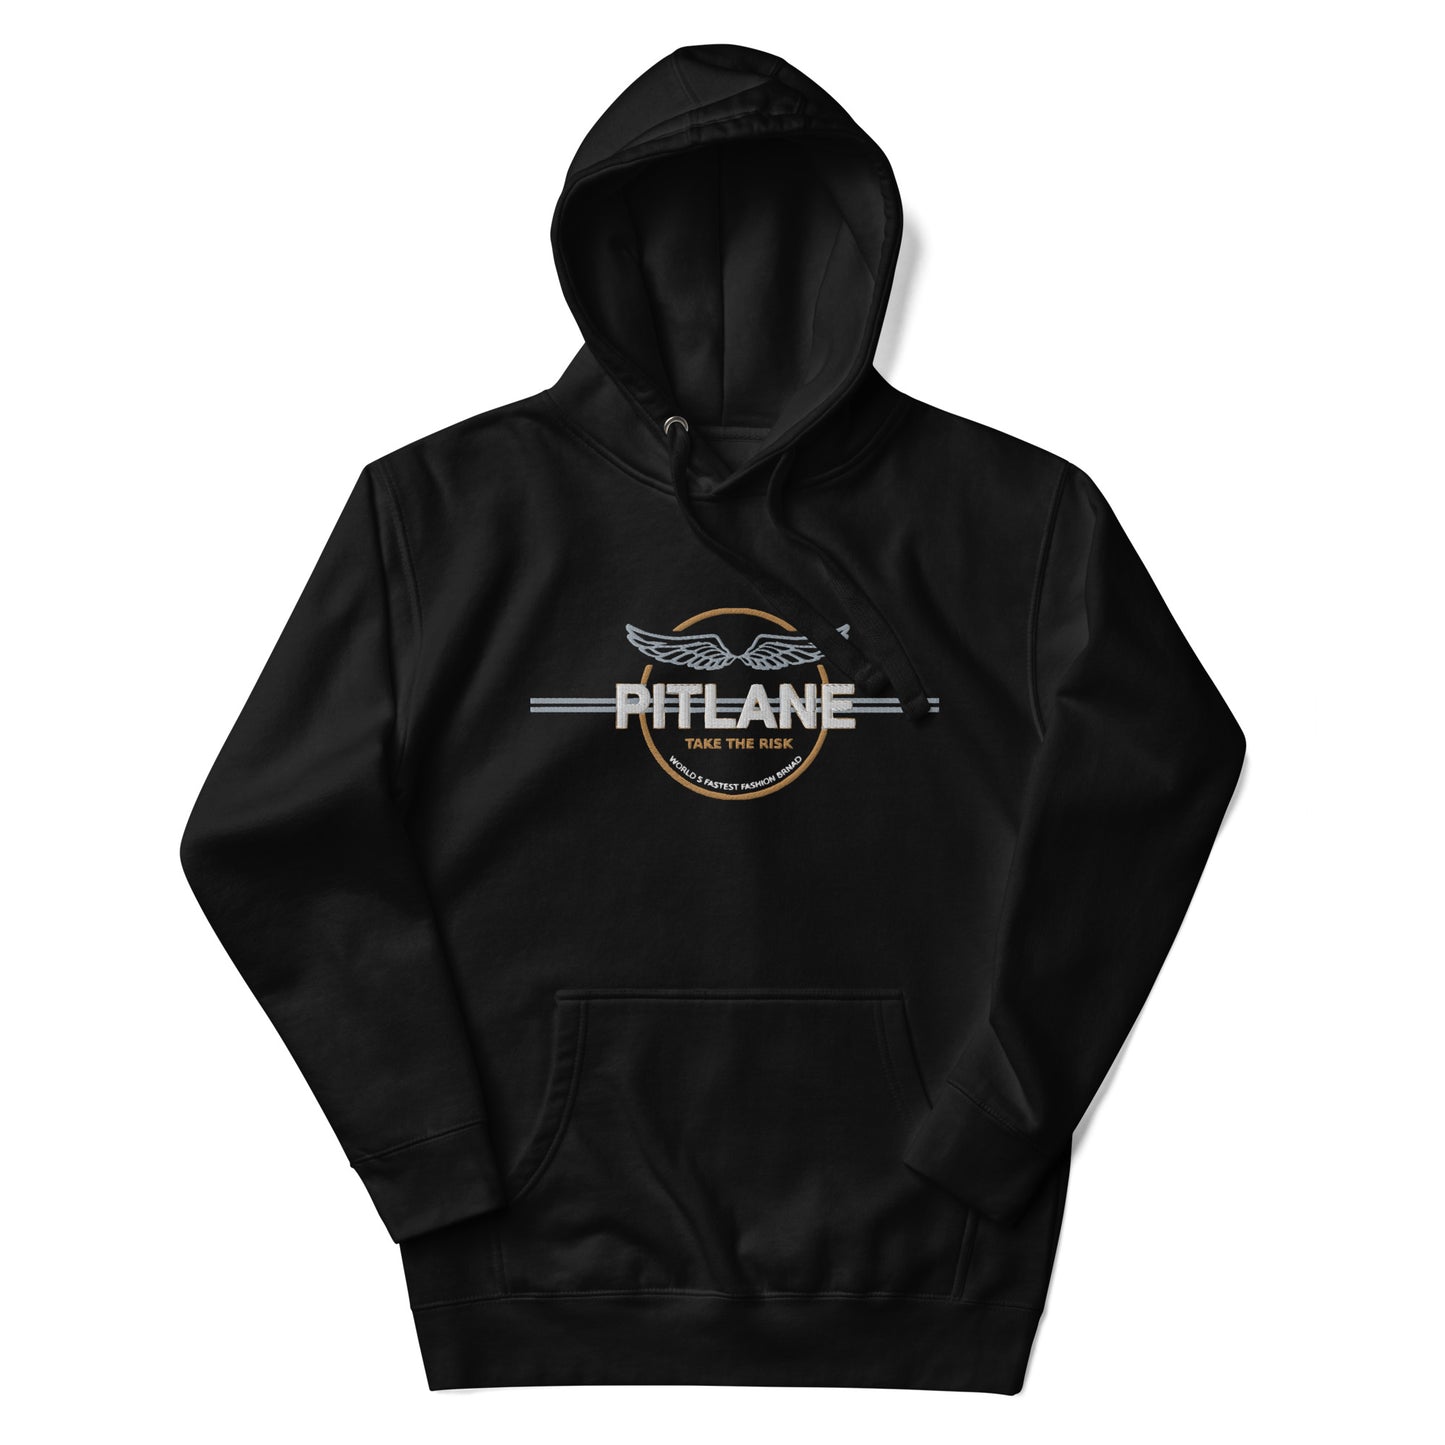 PIT LANE CLOTHING Embroidered Heavyweight Hoodie